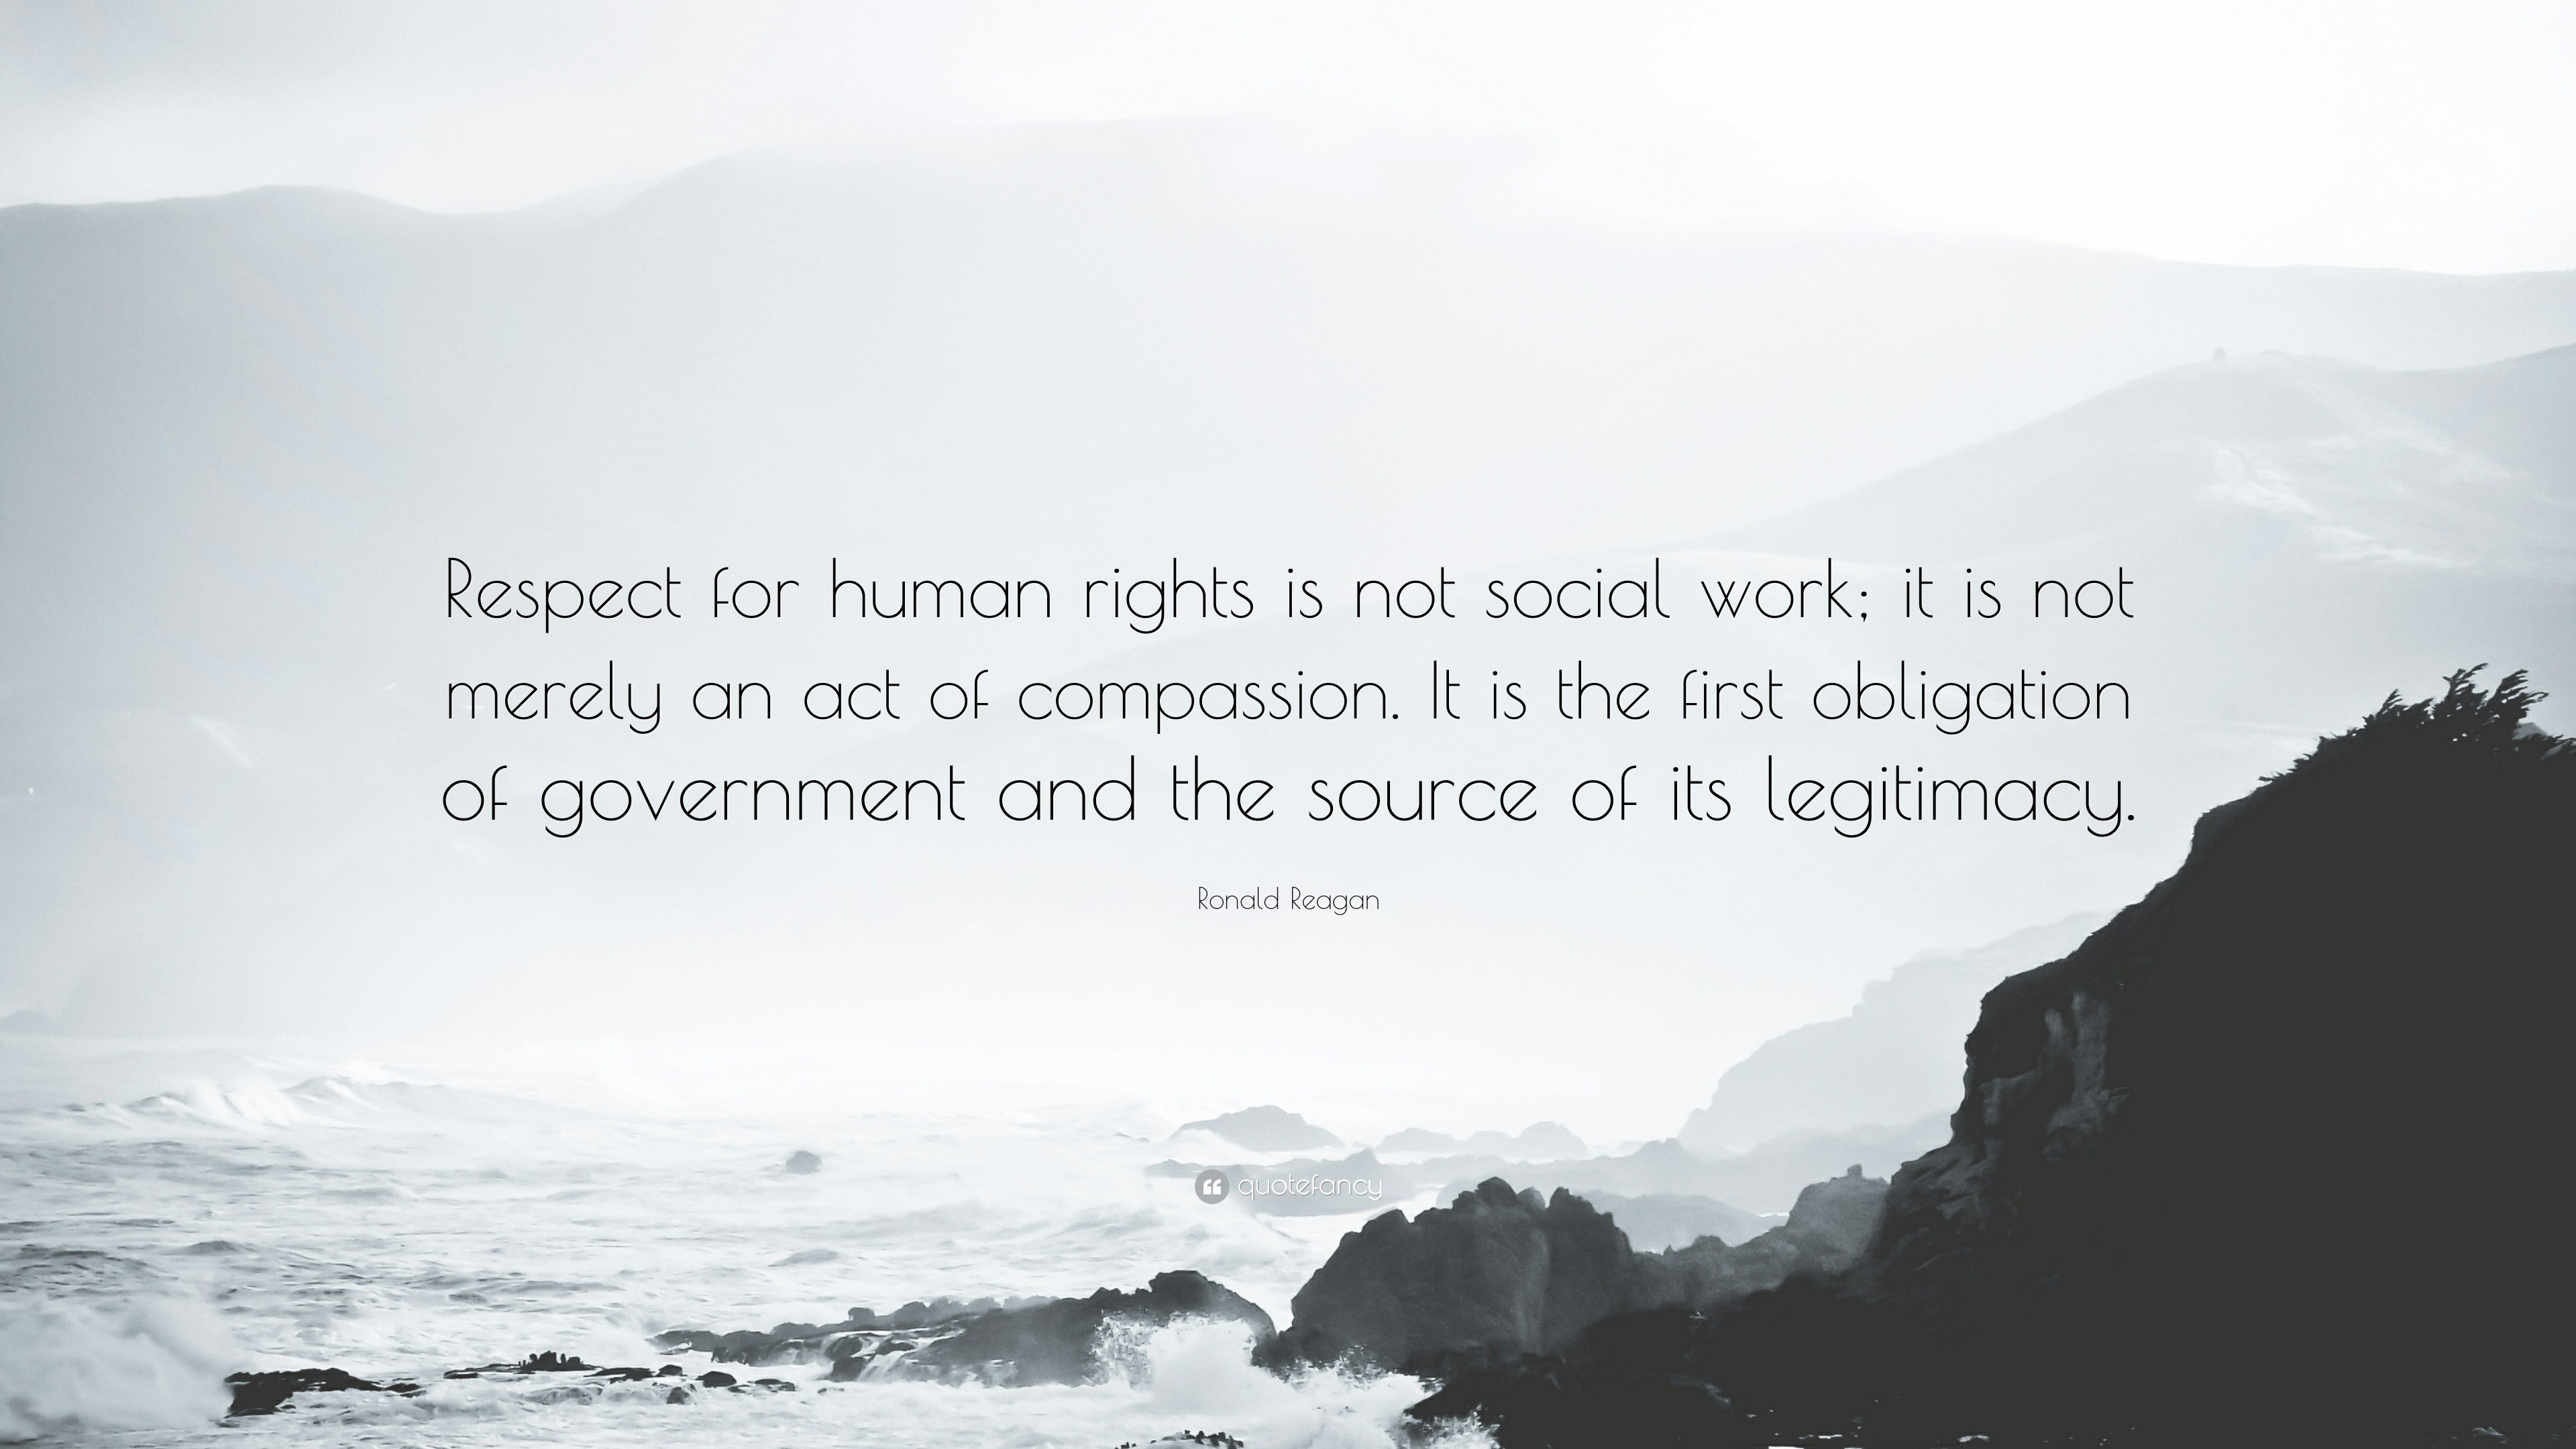 3840x2160 Ronald Reagan Quote: “Respect for human rights is not social work; it is